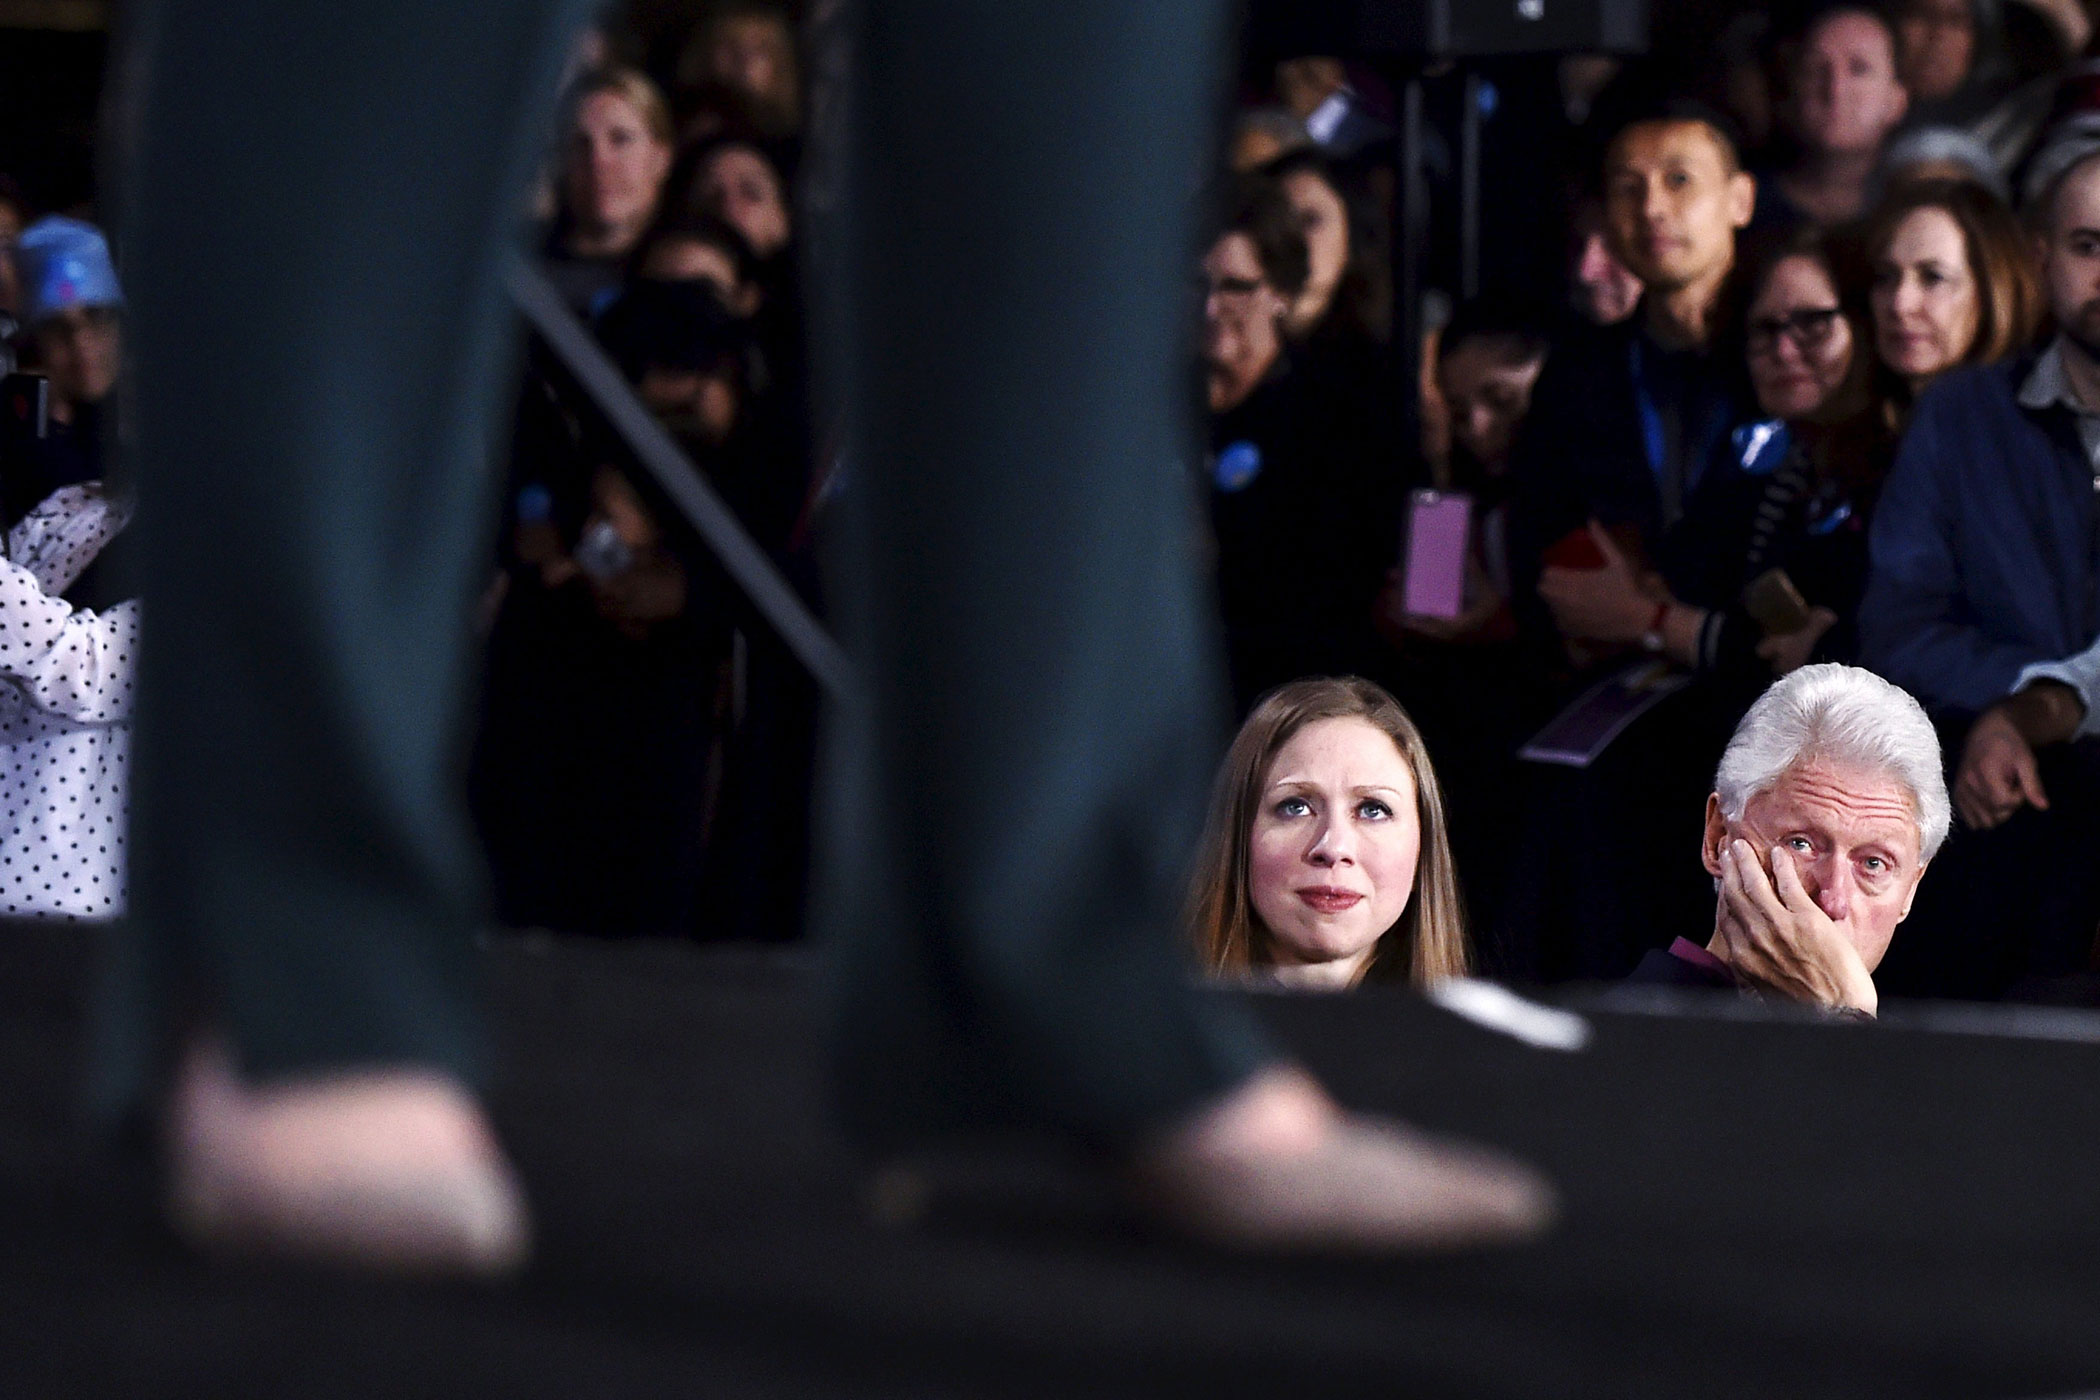 Chelsea Clinton and her father, former President Bill Clinton watch Hillary Clinton speak at a campaign rally at the Clark County Government Center in Las Vegas on Feb. 19, 2016.